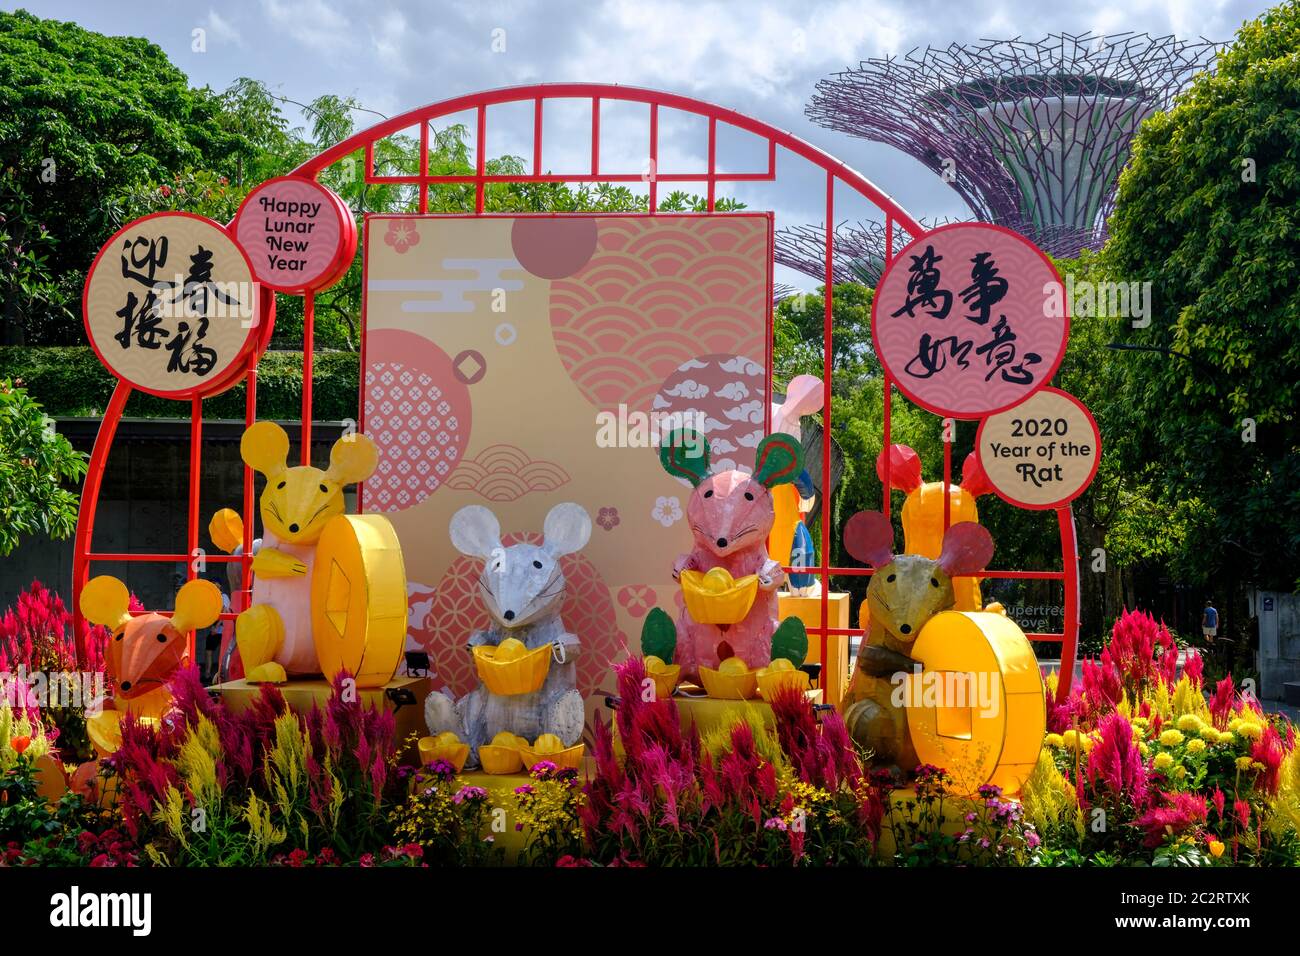 Chinese New Year display for the Year of the Rat in the Gardens by the Bay, Singapore, 2020 Stock Photo